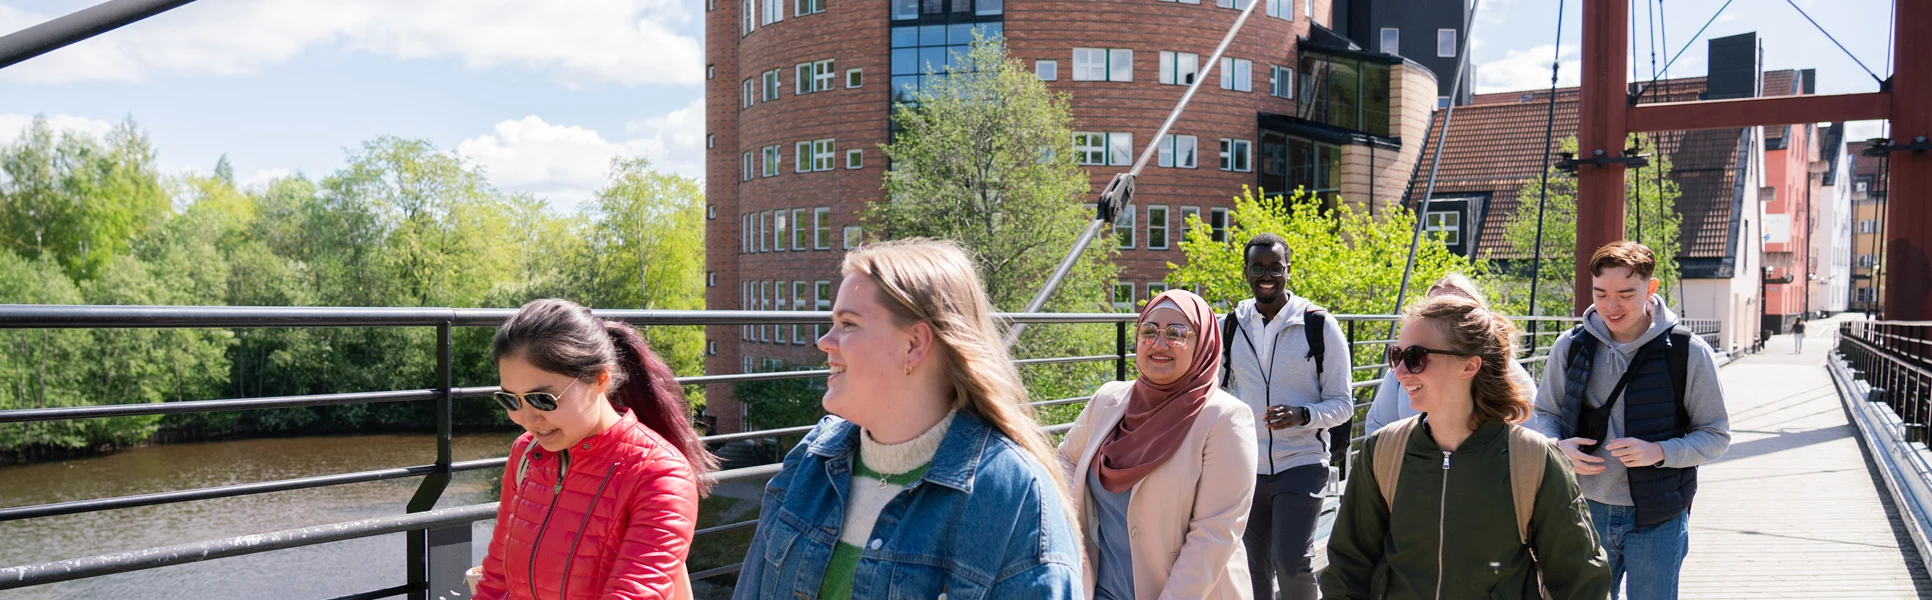  A group of friends walking on the bridge at Campus Sundsvall.